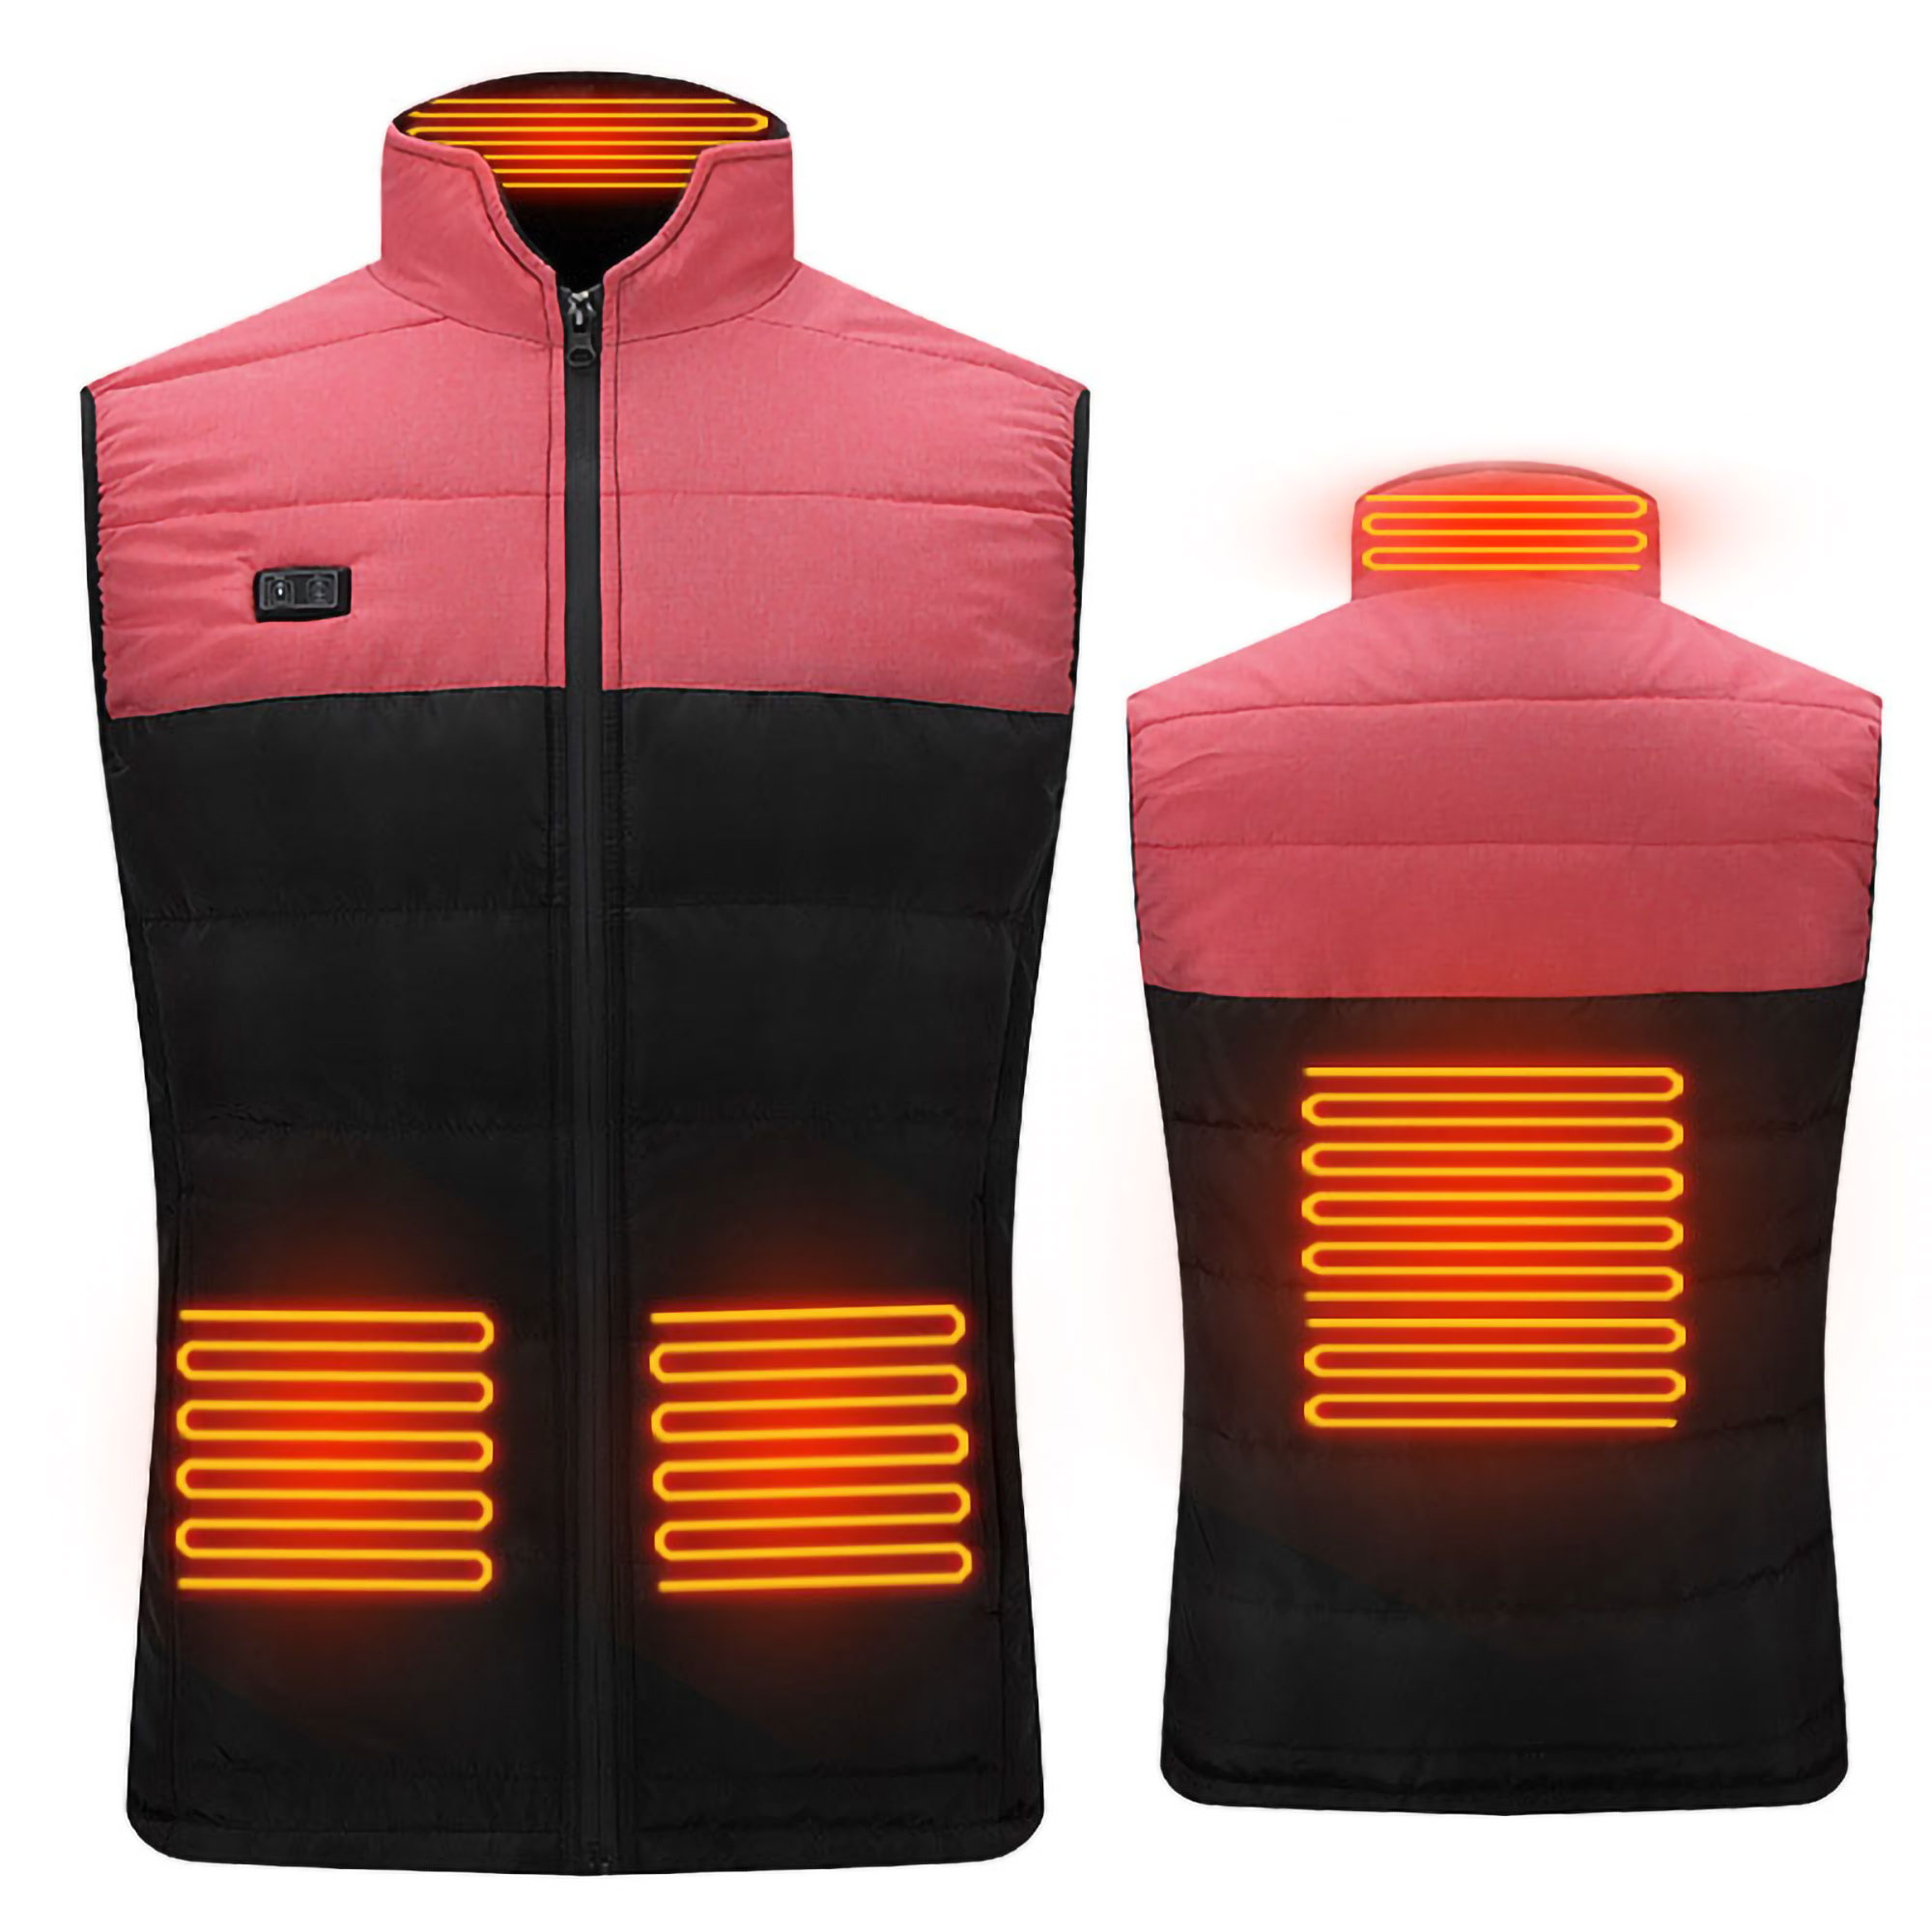 Sexy Dance Lightweight Heated Vest for Men Women Electric Thermal Jacket Sleeveless Zipper Coat Winter Warmth Heating Outwear With Battery Pack - image 1 of 3